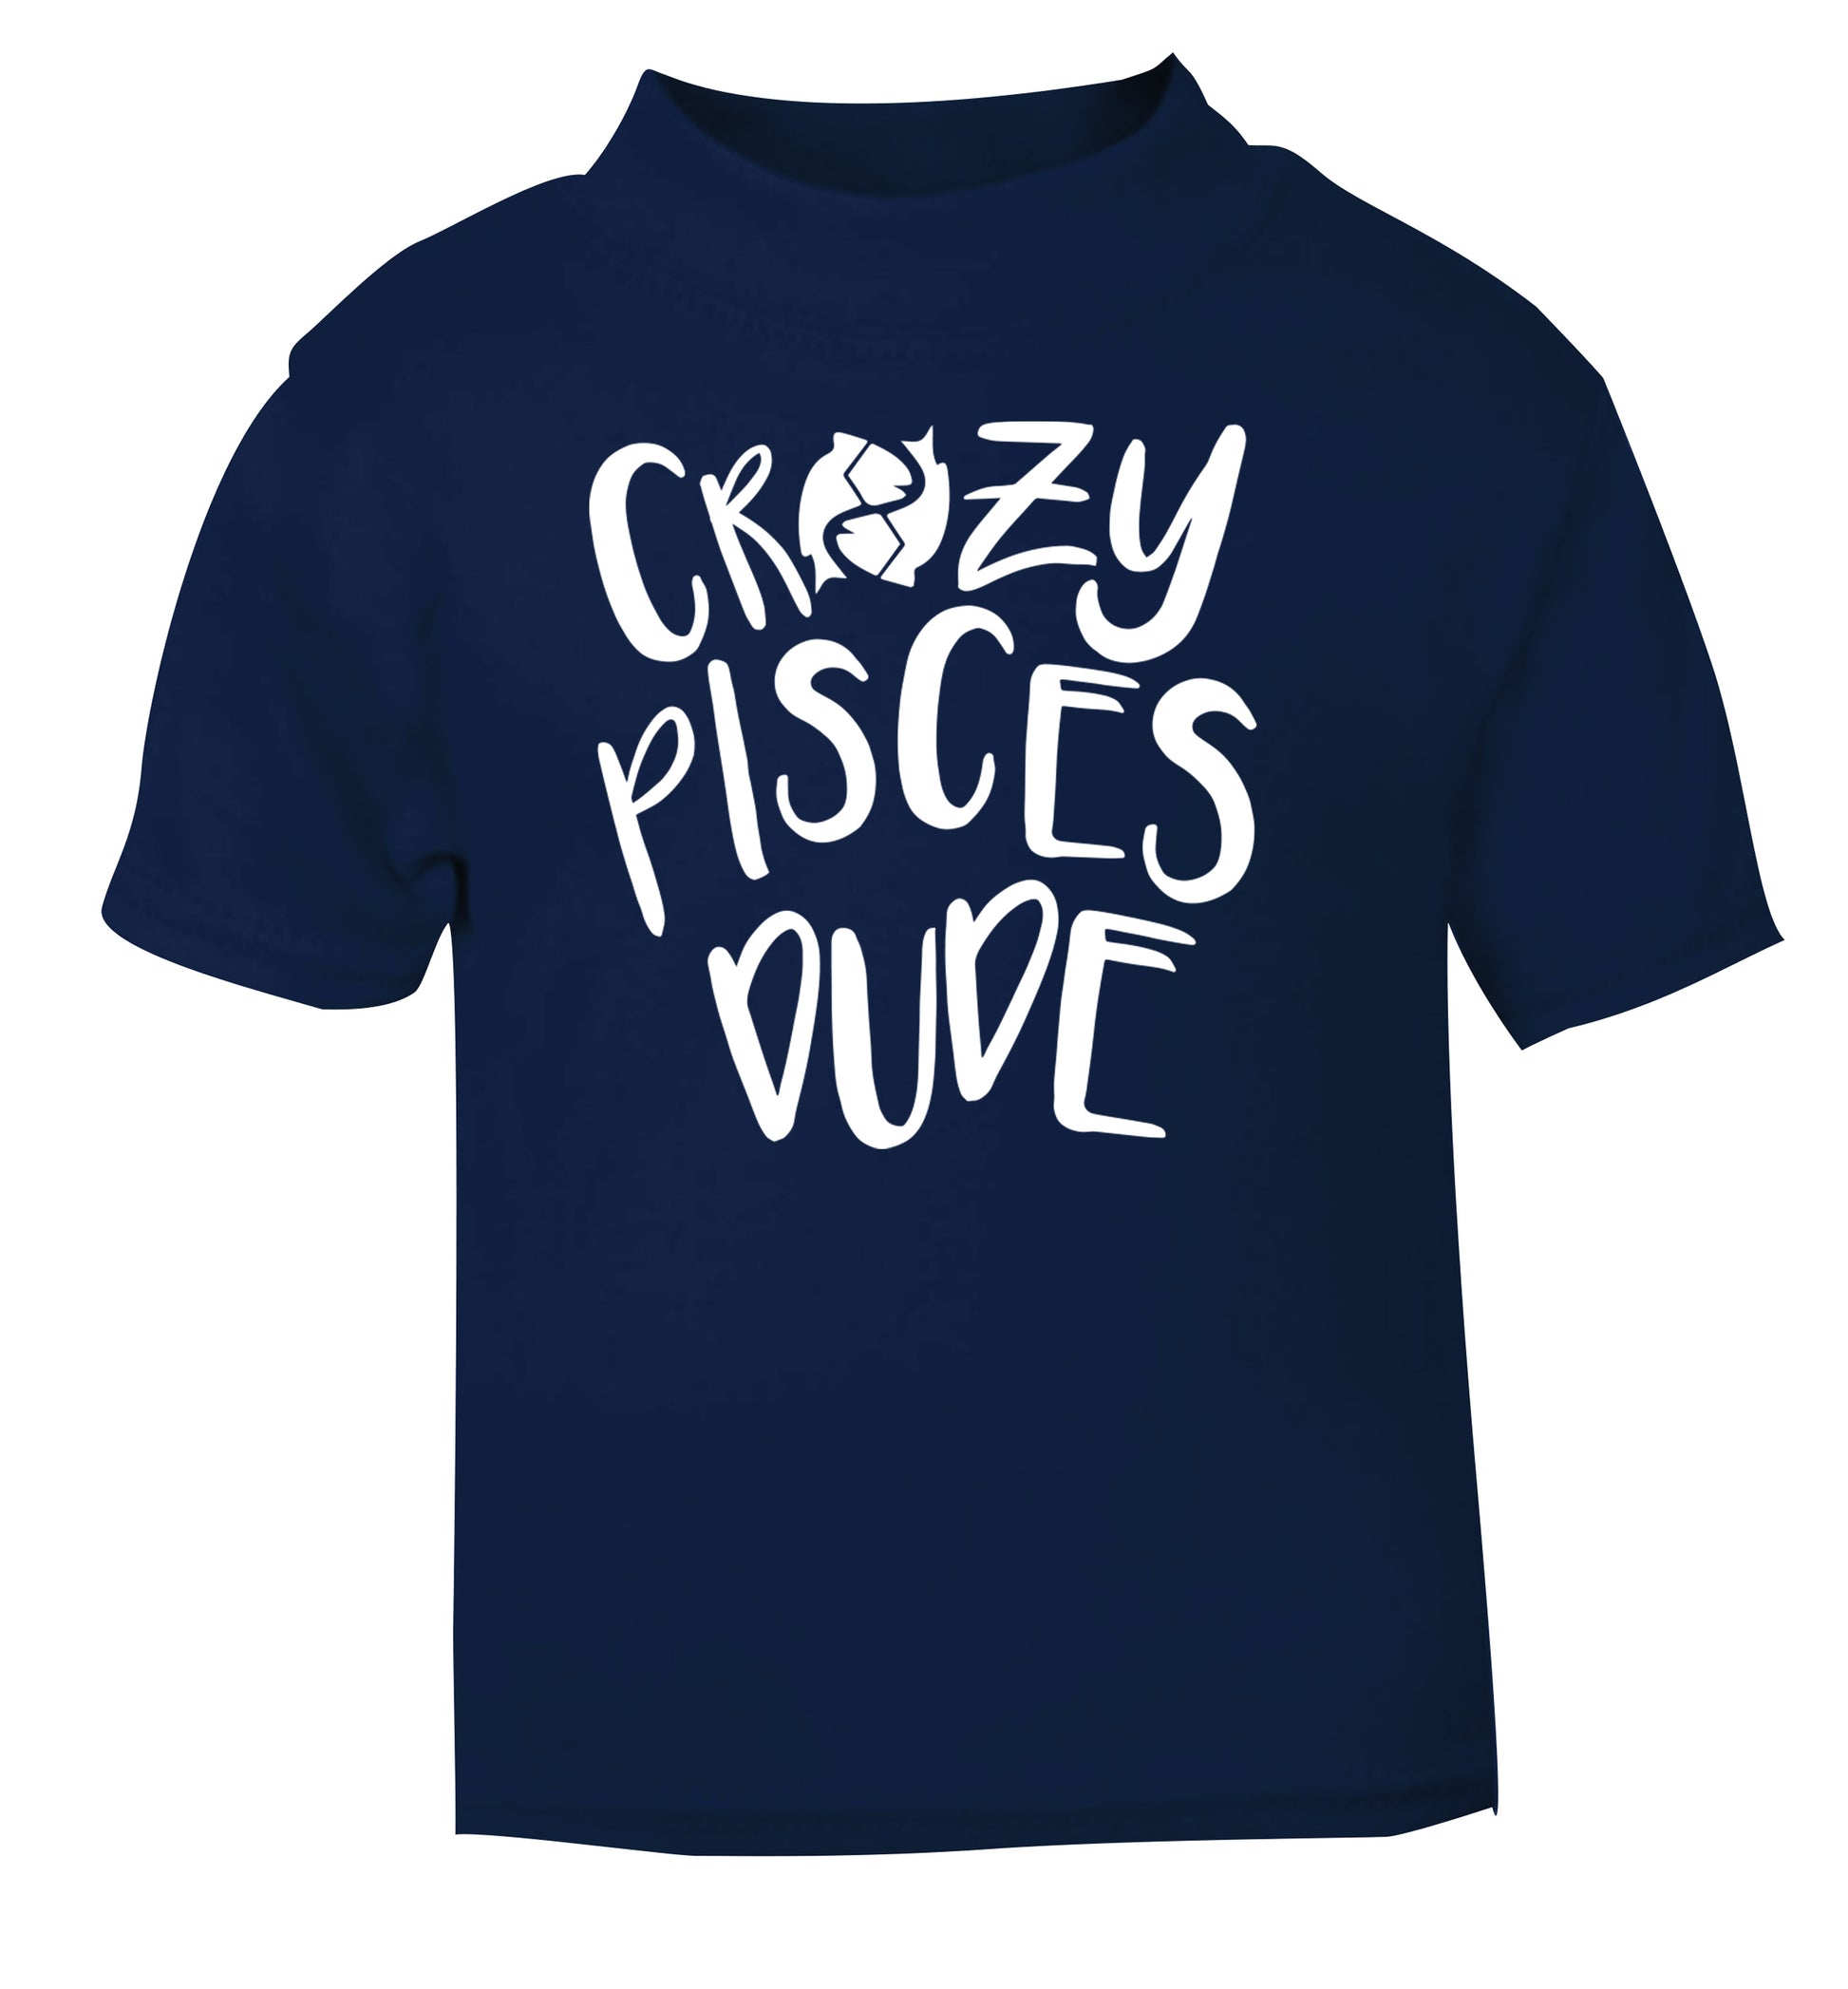 Crazy pisces dude navy Baby Toddler Tshirt 2 Years